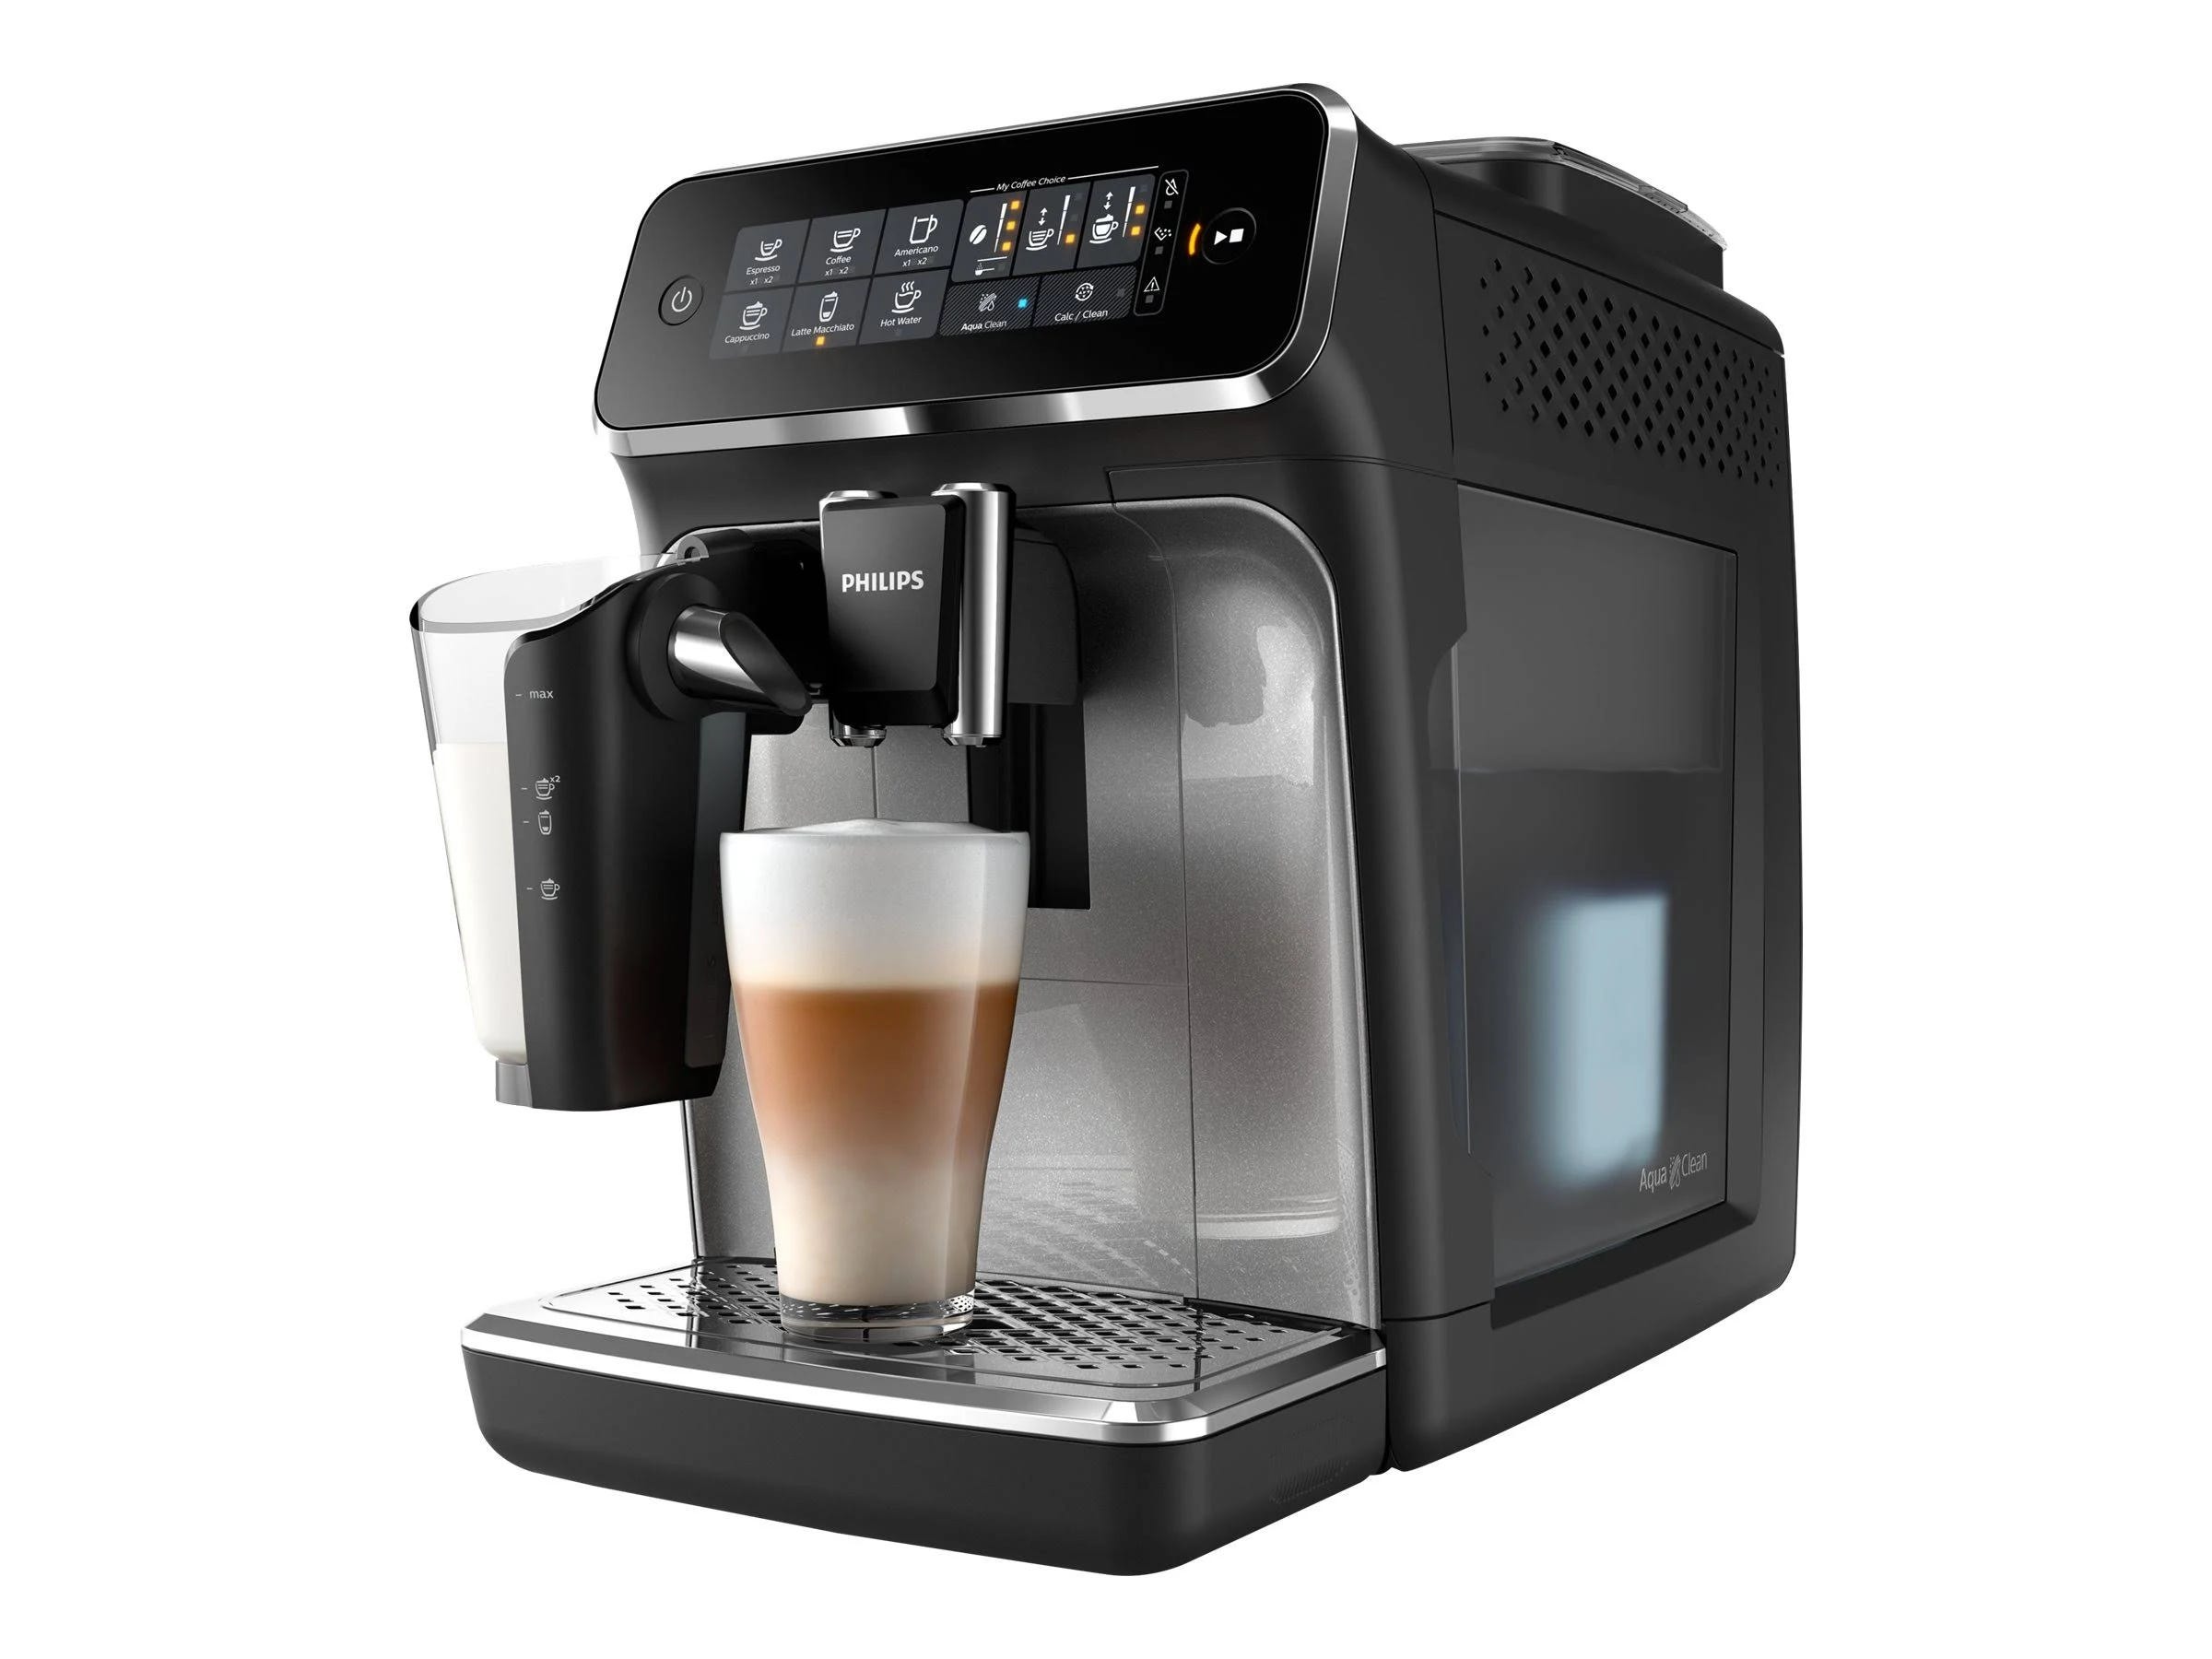 Philips 3200 Series LatteGo Milk System Bean-to-Cup Coffee Machine | Image